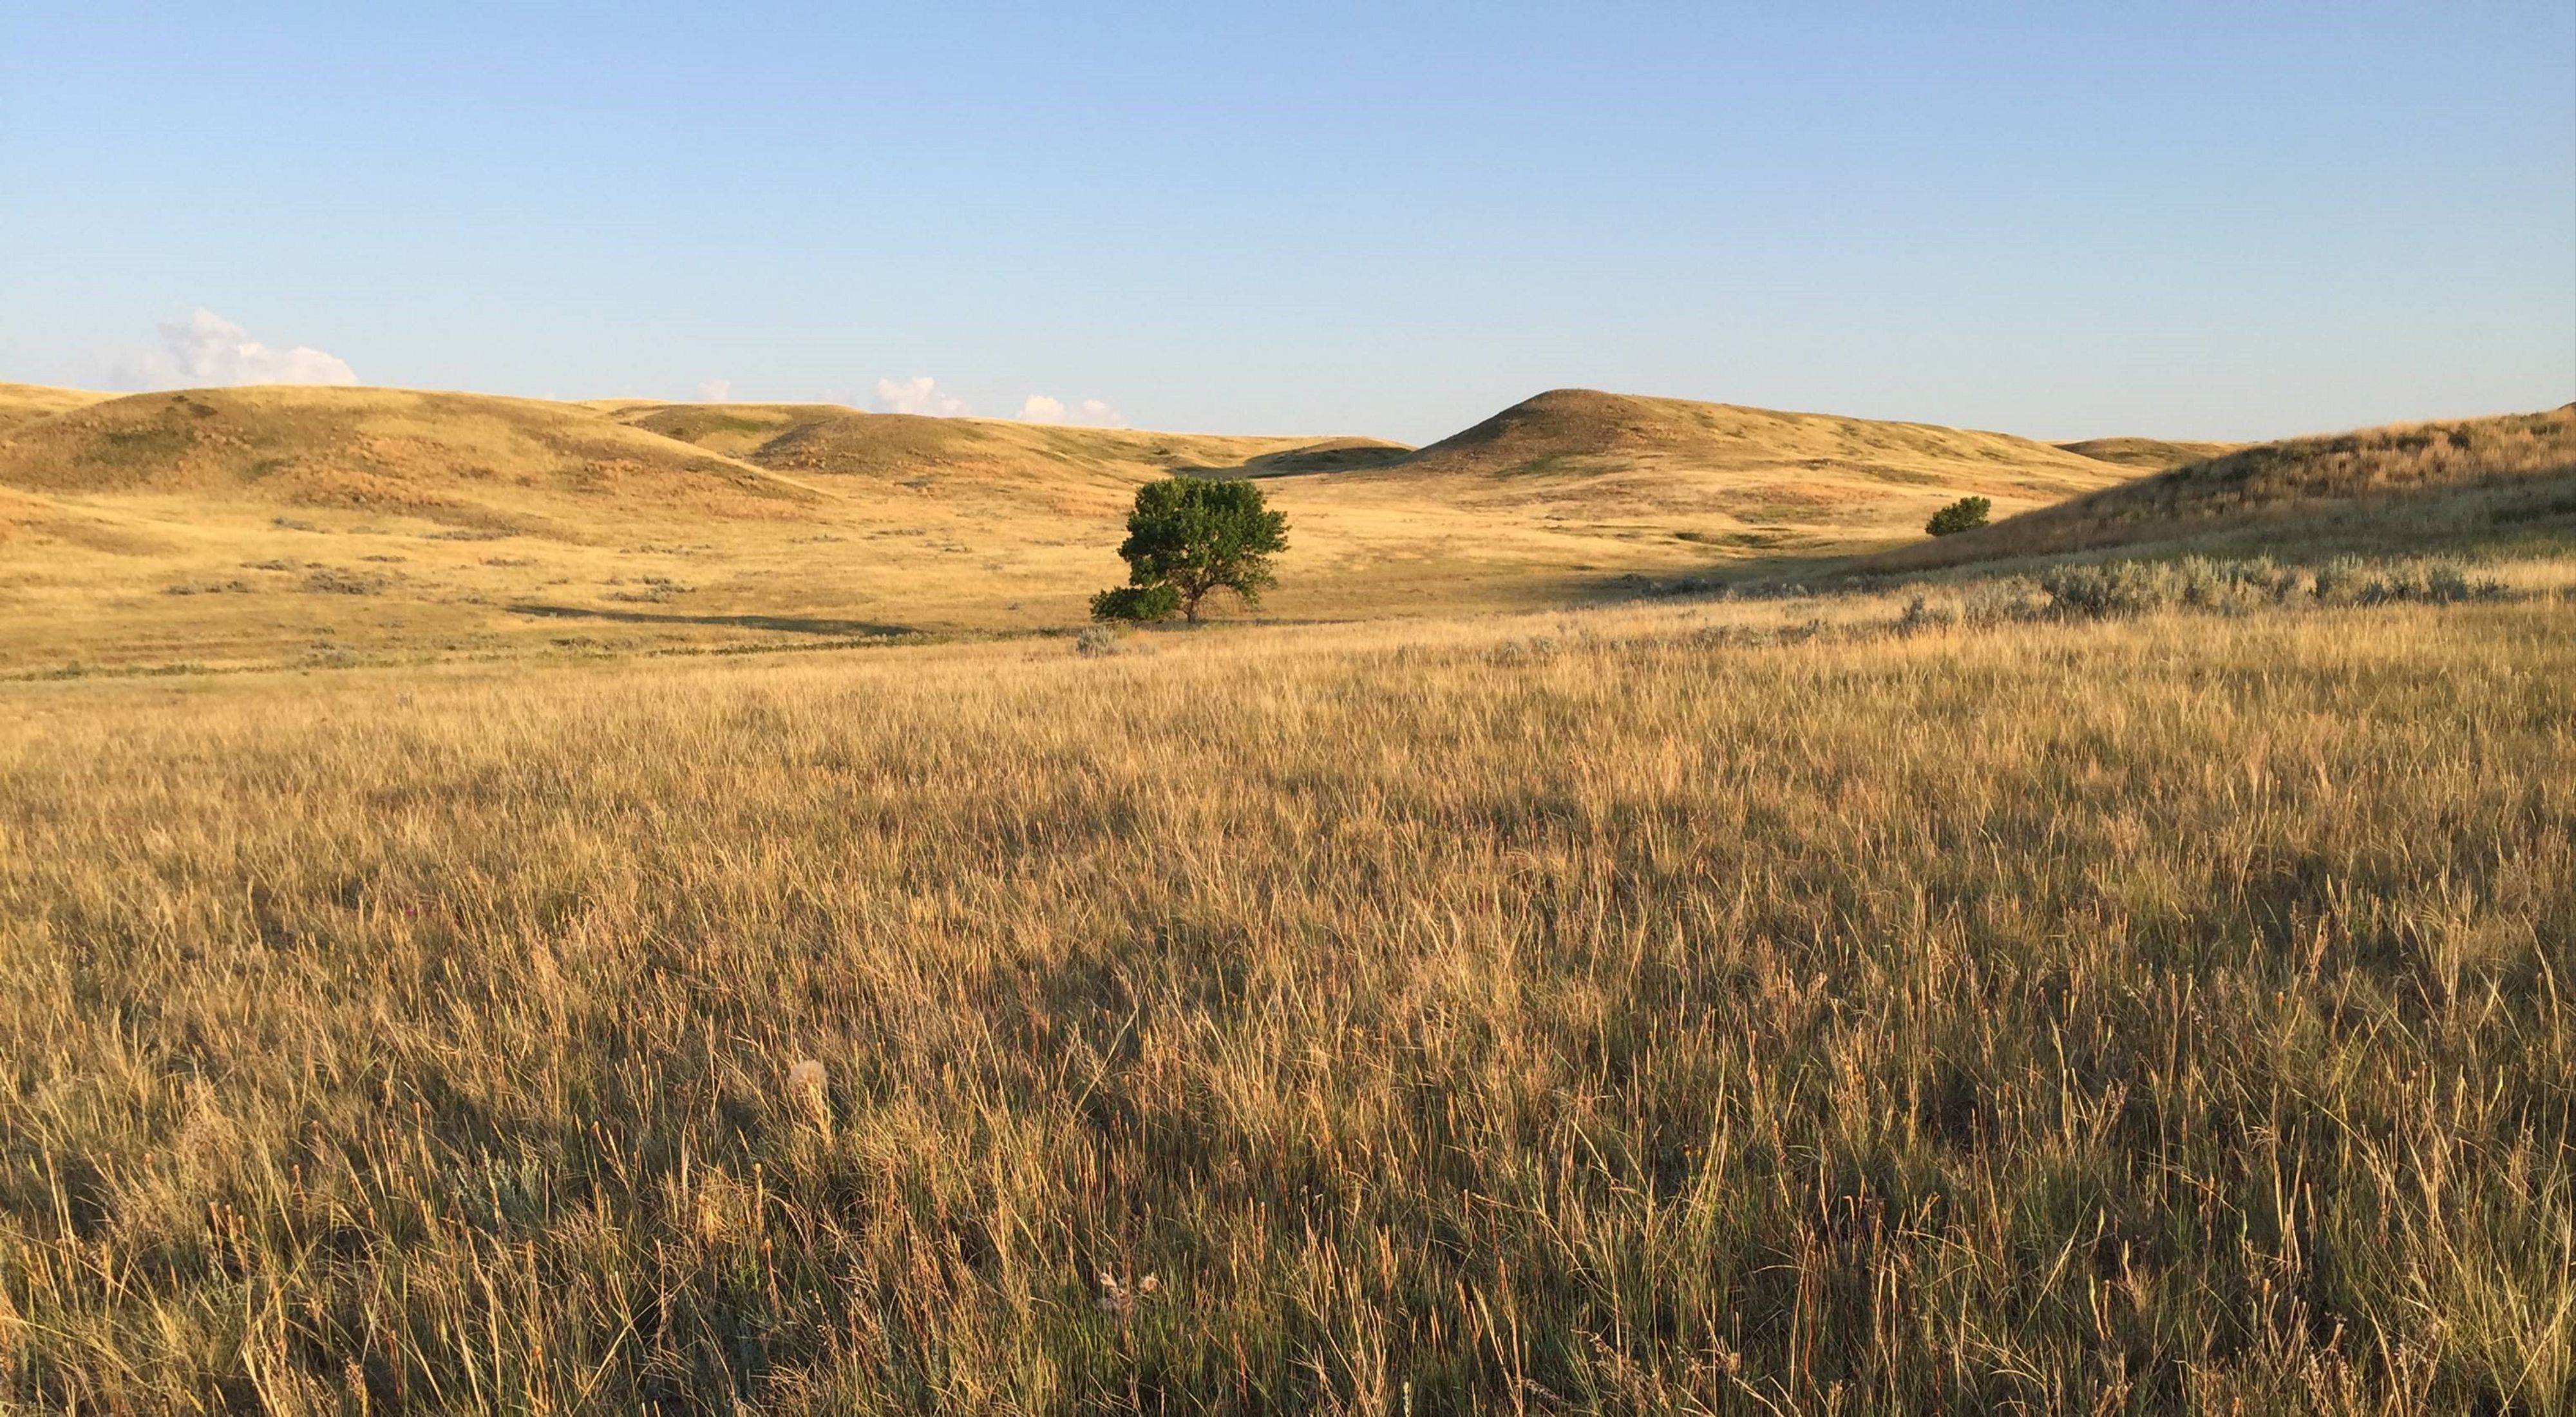 Protected grassland adjacent to Bitter Creek Wilderness Study Area in Montana's Northern Great Plains 